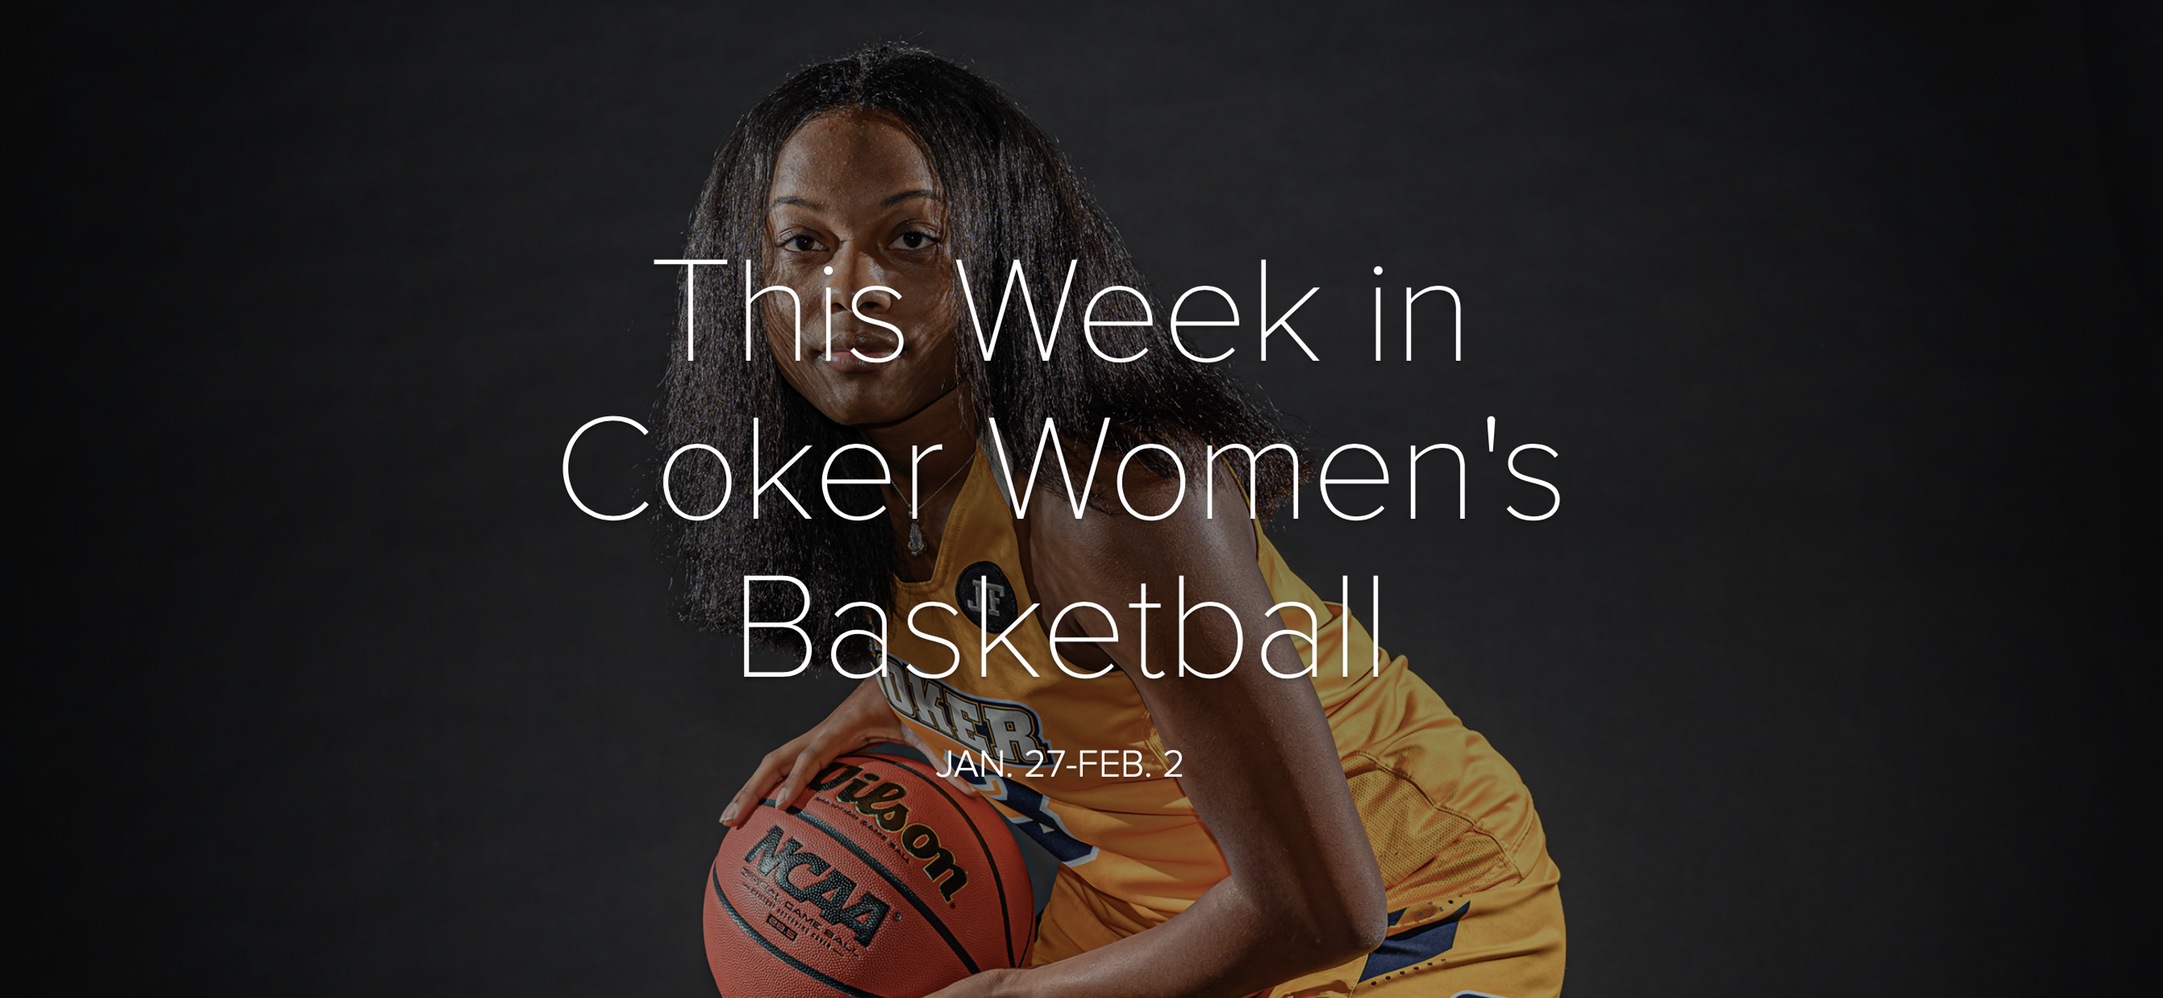 Women's Basketball Wraps Up Season Series with Wingate, Mars Hill This Week